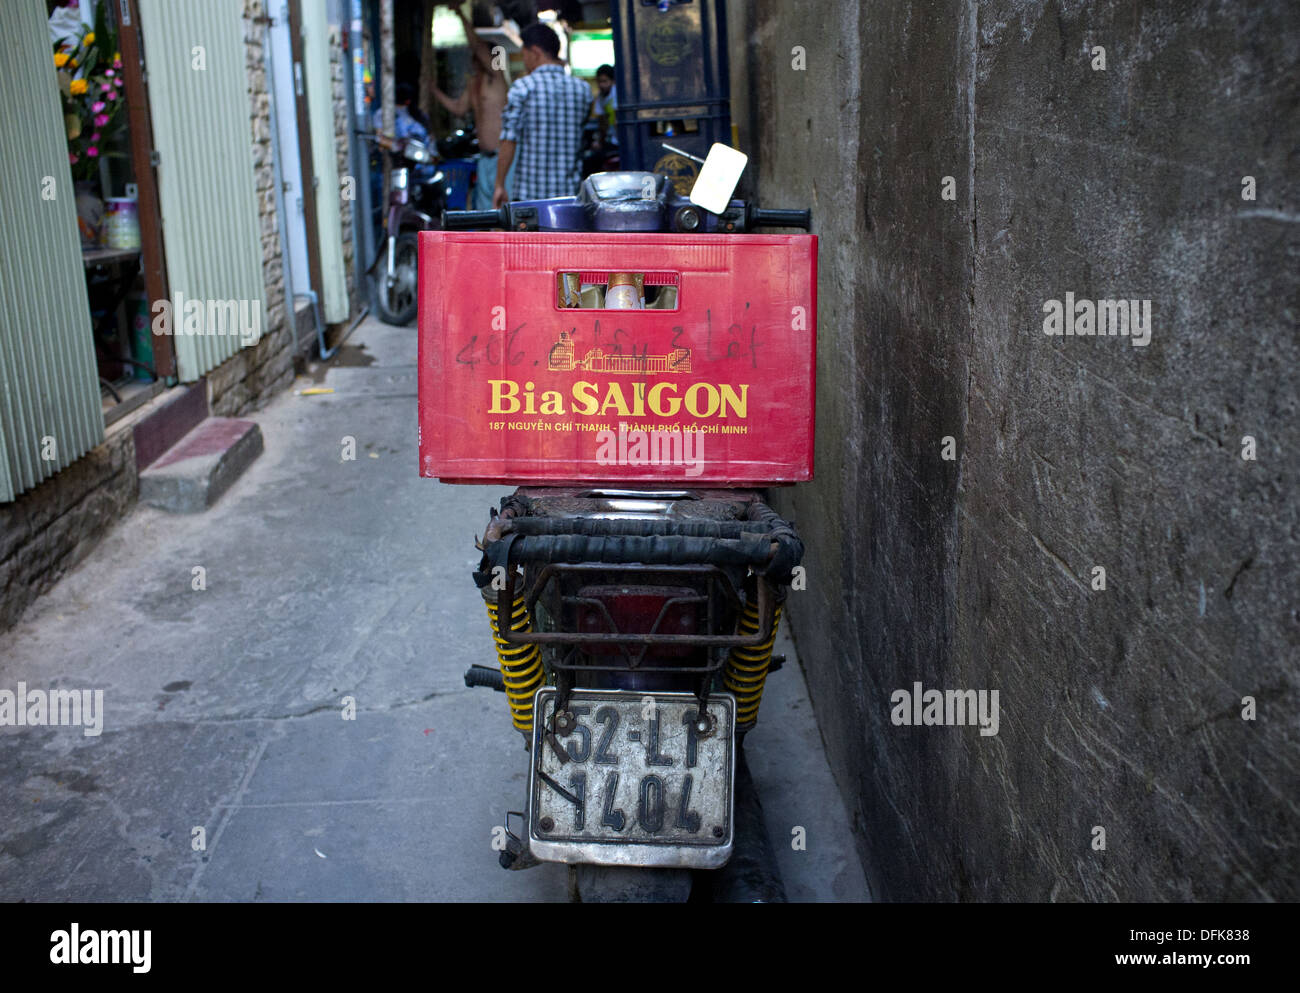 Bia Saigon (Saigon beer) crate on the back of a motorbike parked in an alley in Saigon, Vietnam Stock Photo